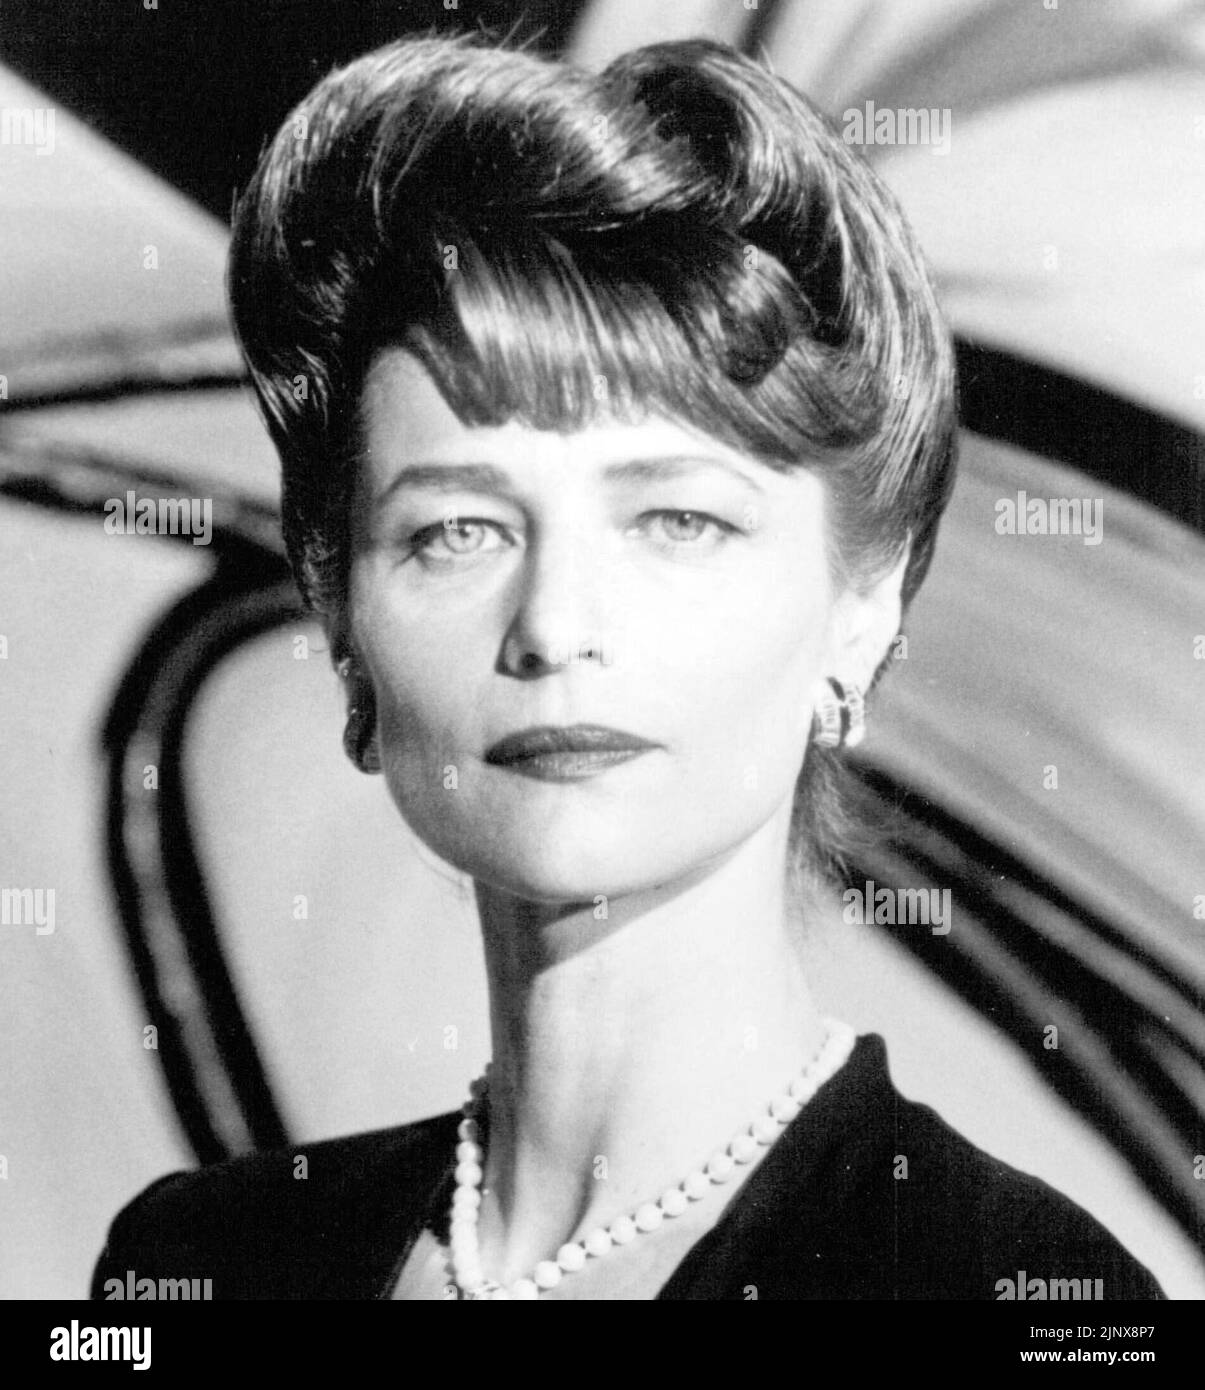 CHARLOTTE RAMPLING in D. O. A. (1988), directed by ROCKY MORTON and ANNABEL JANKEL. Credit: TOUCHSTONE/DISNEY/WARNERS / Album Stock Photo